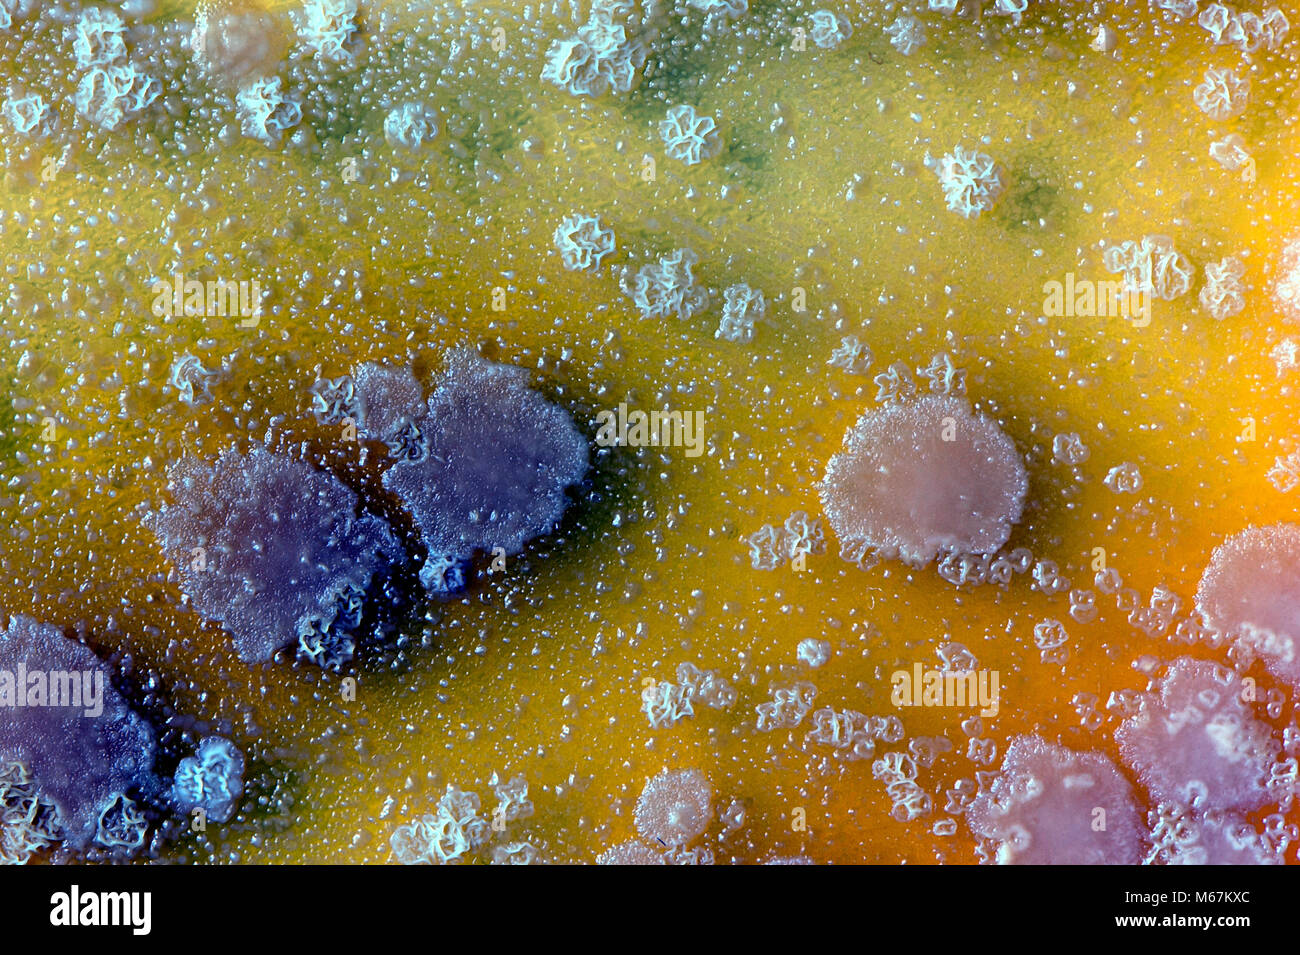 microbiological background made of yeast colonies. Surface of agar petri dish. Stock Photo